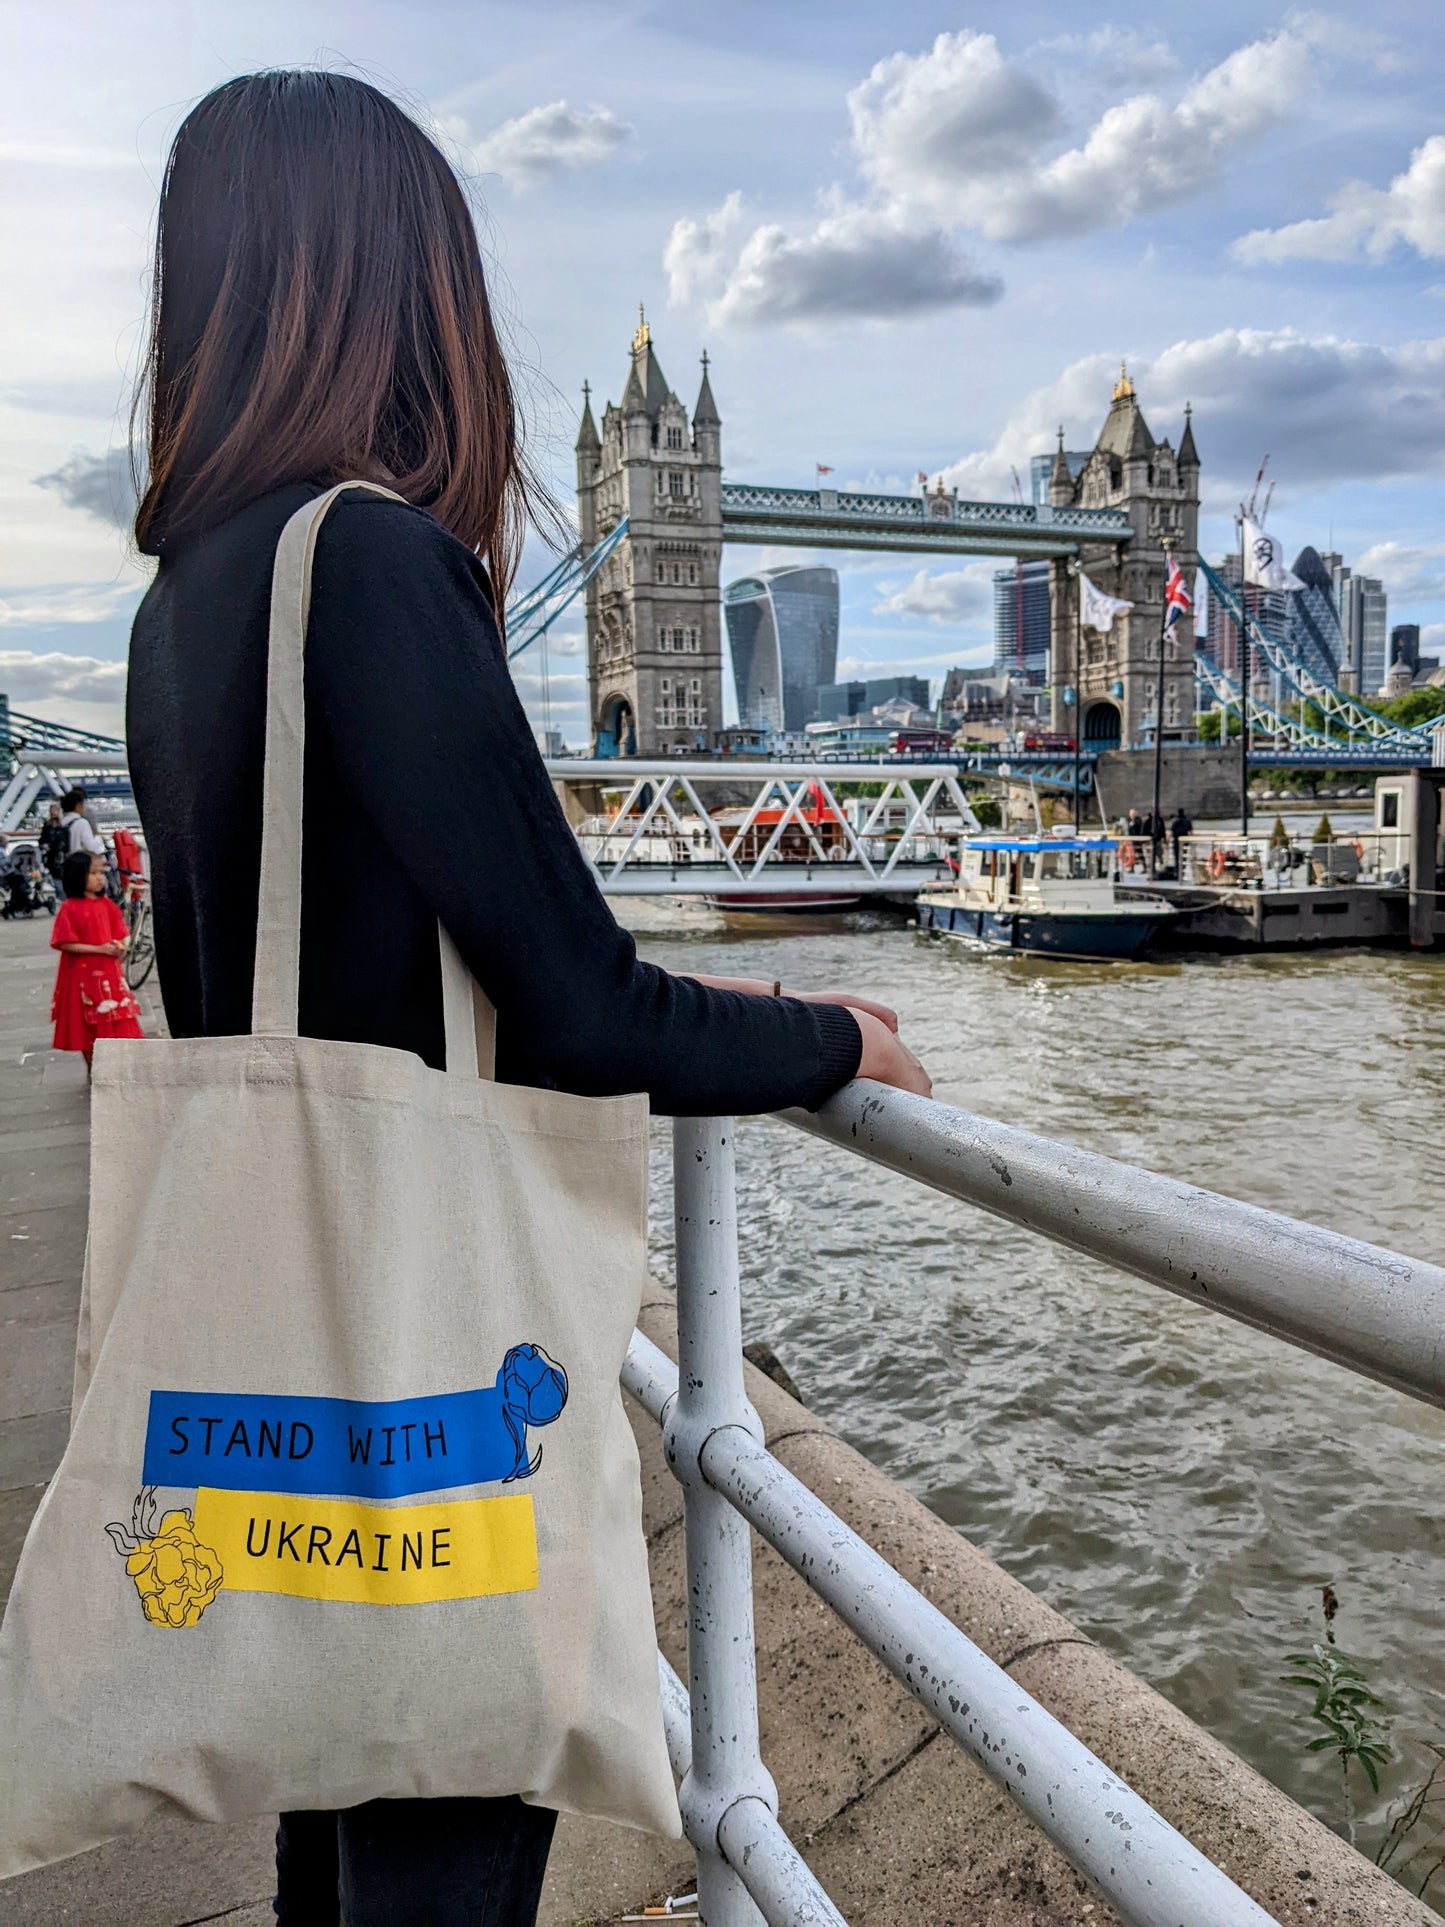 Stand with Ukraine Tote Bag 🇵🇱 Printed in Poland 🇮🇳 Origin from India